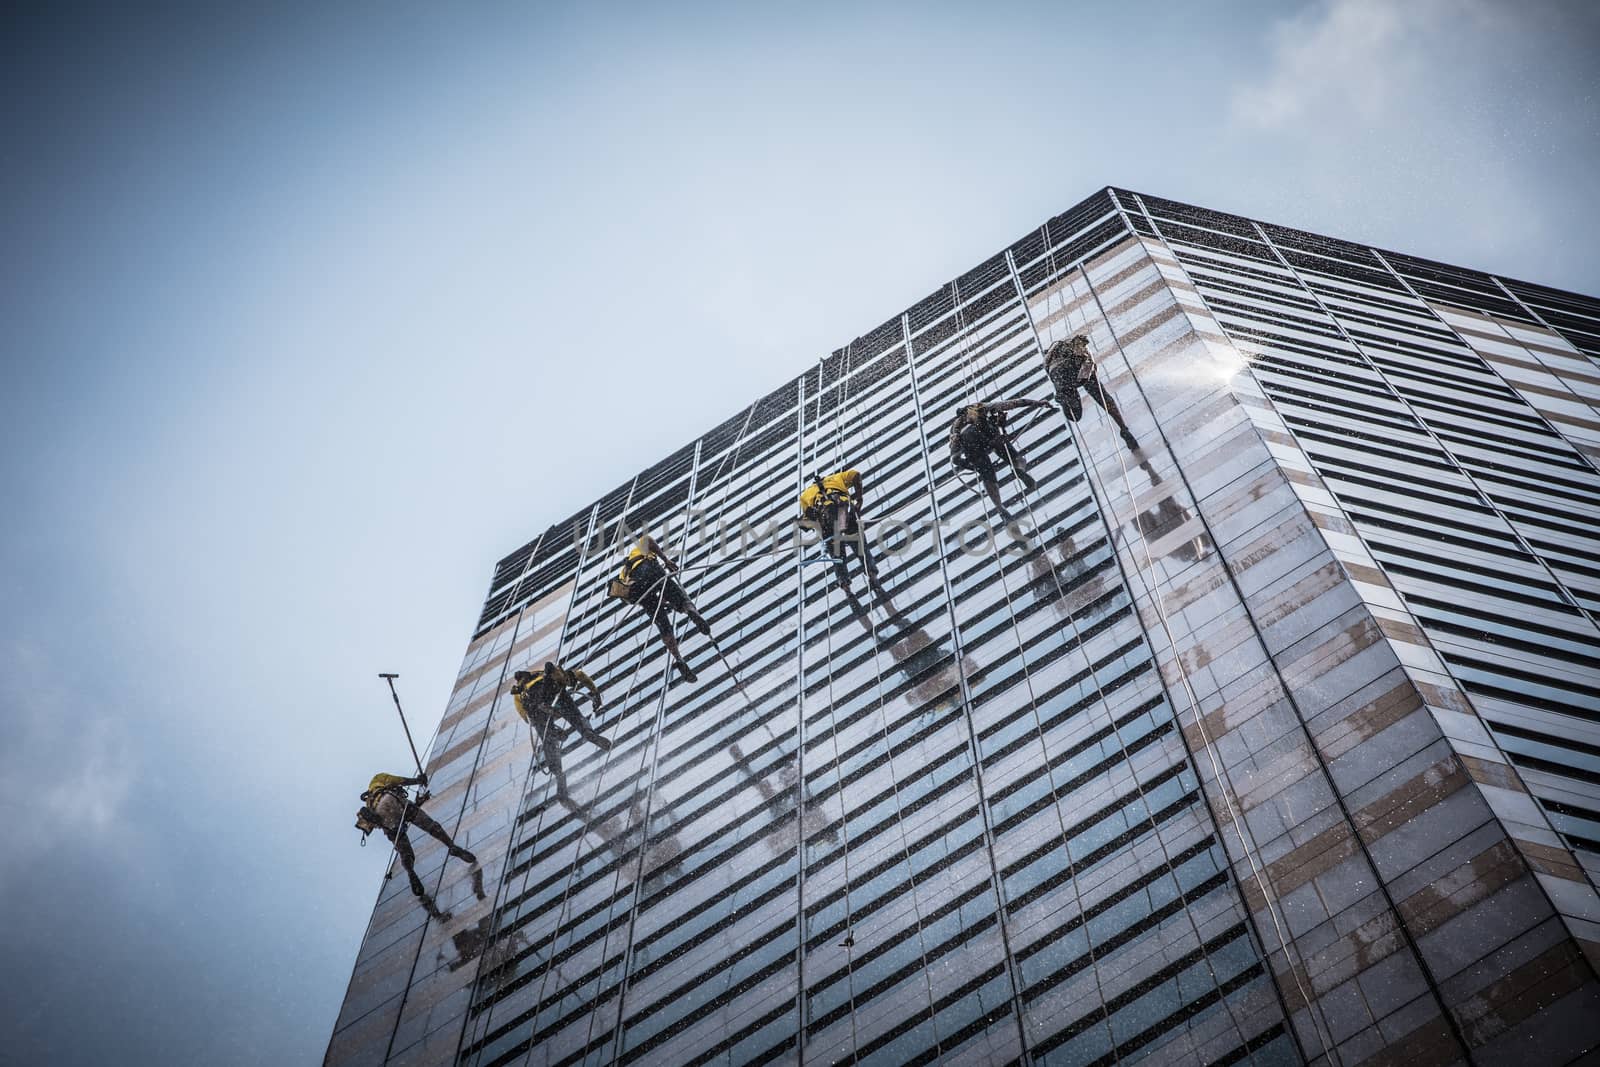 Laborers clean windows as a team on a skyscraper in downtown Singapore